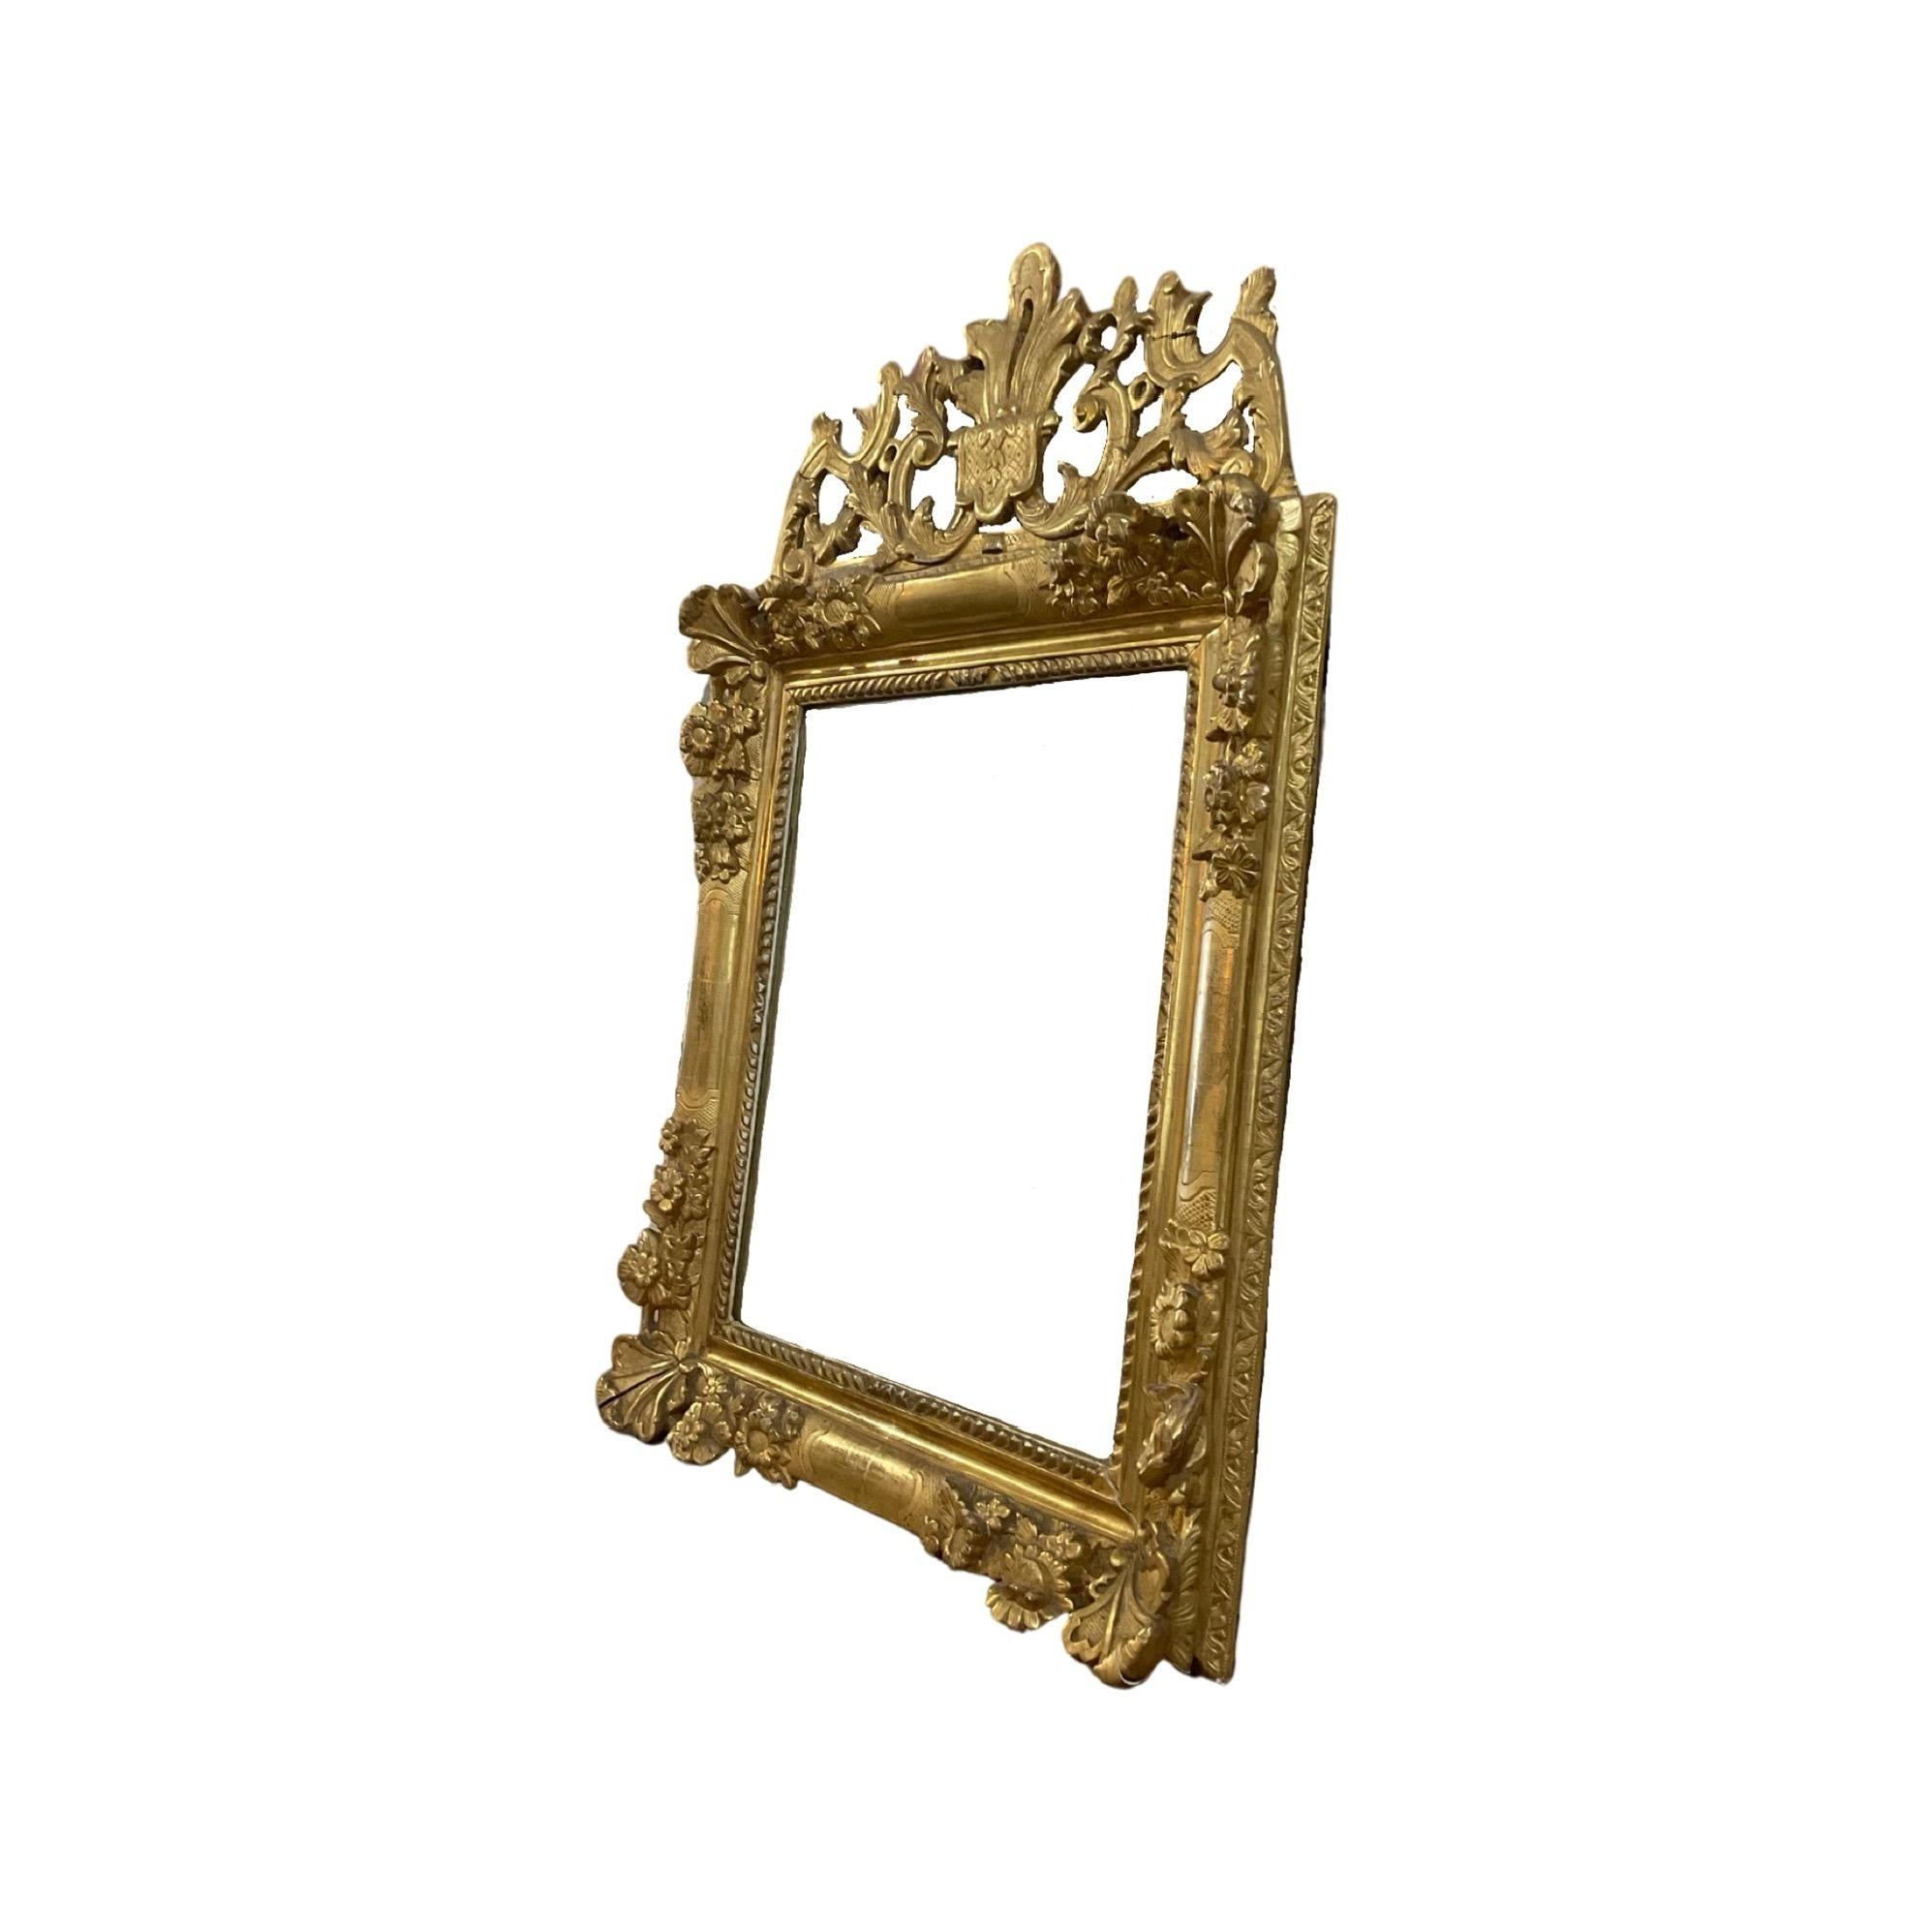 Louis XVI style mirror. Mirror is made out of oakwood. Hand-carved plaster with gold leaf finish. Originates from France. Circa, 18th century. 

